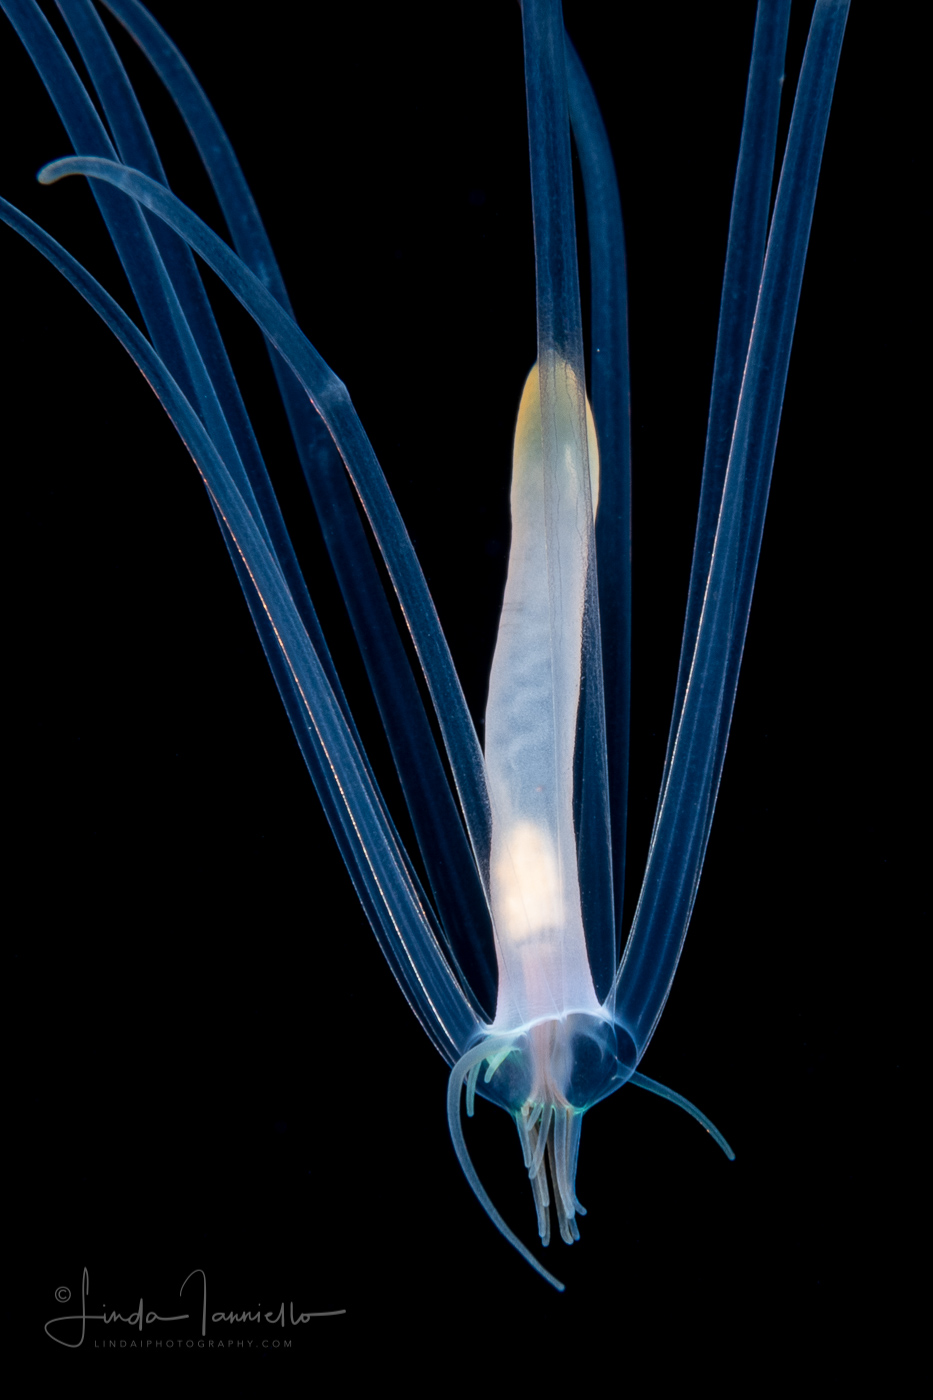 Pelagic Larval Stage of a Tube Anemone - Ceriantharia